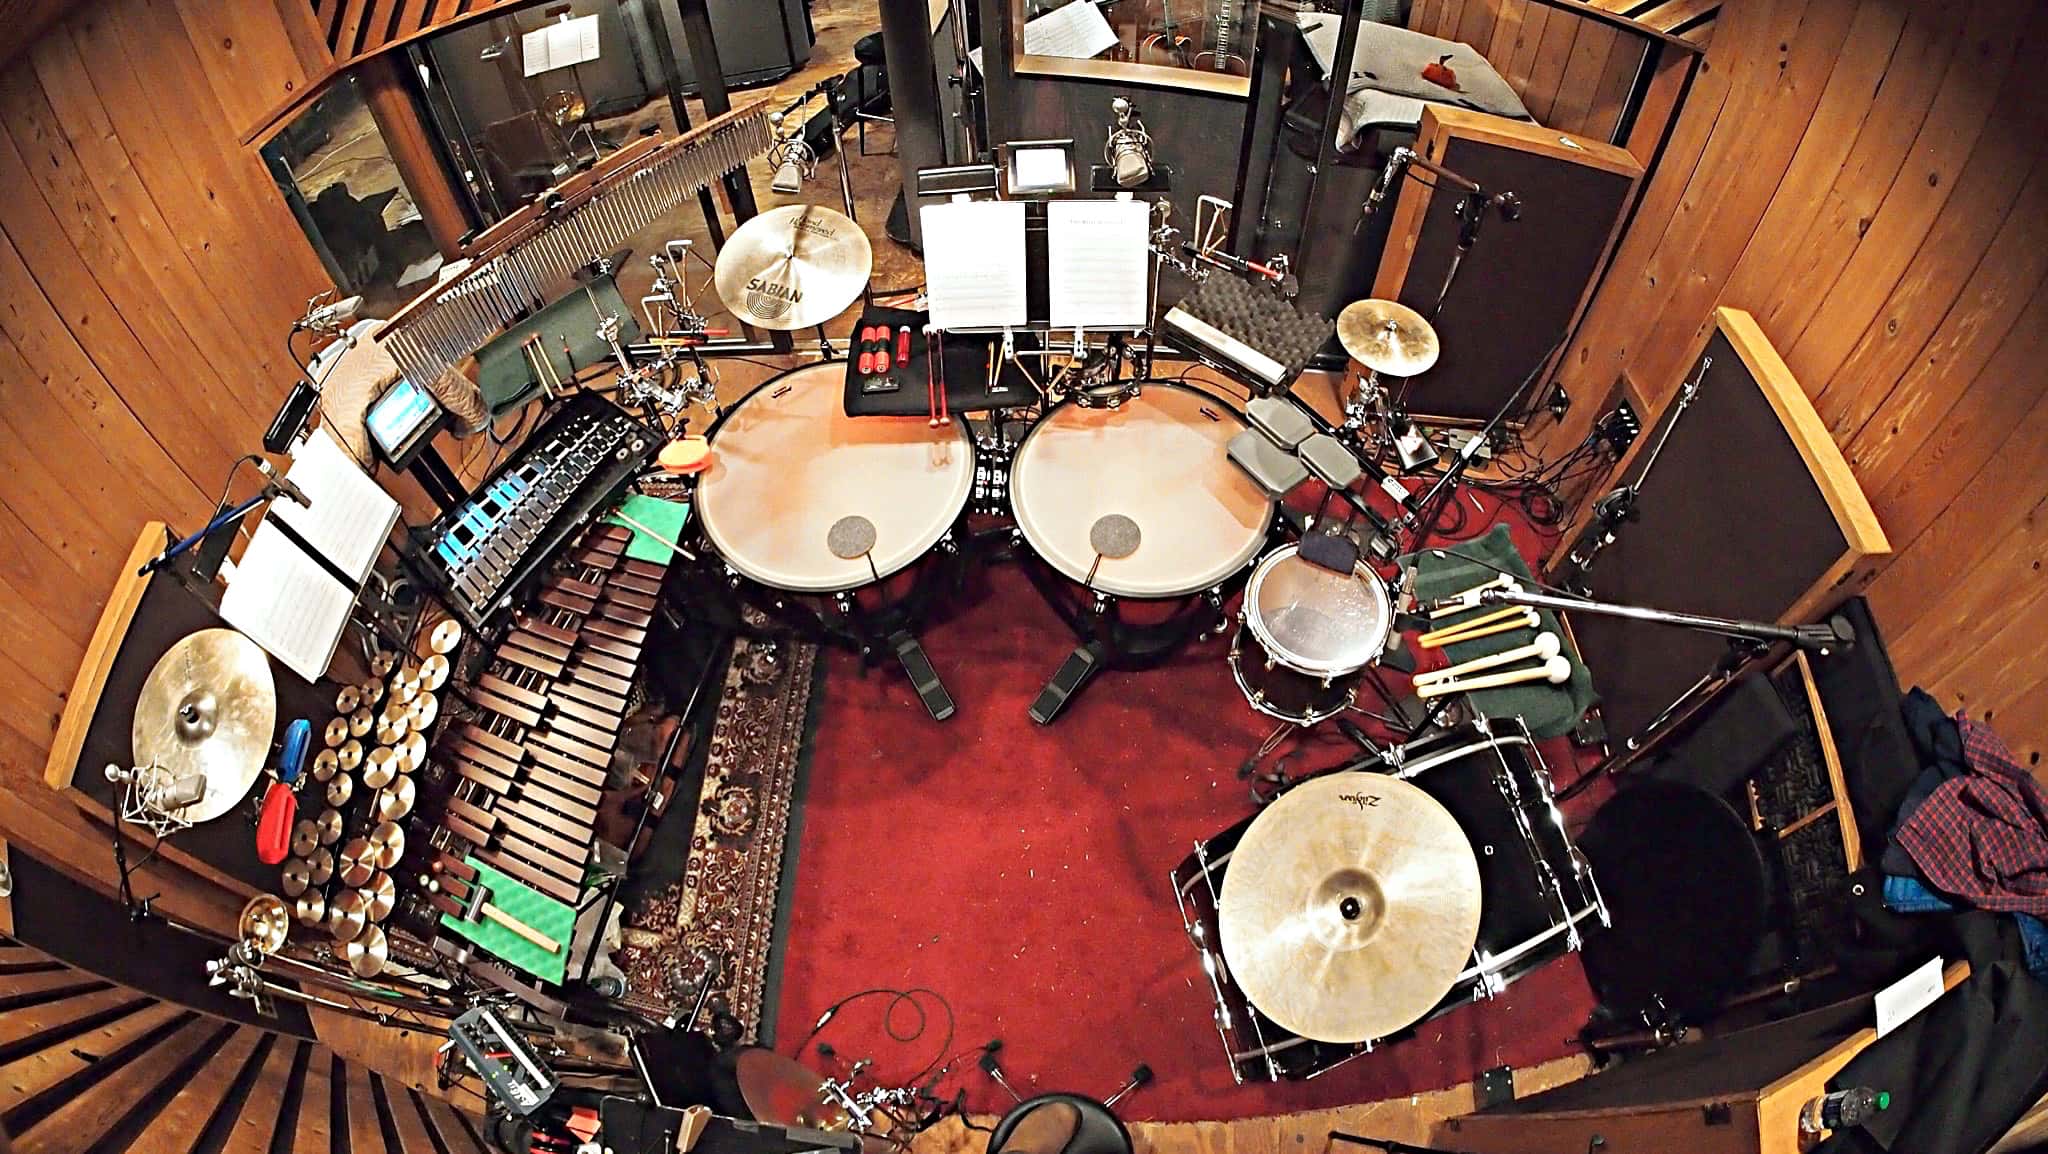 Billy Miller's percussion setup for the Broadway Cast Album of Big Fish at Avatar Studios in New York City.